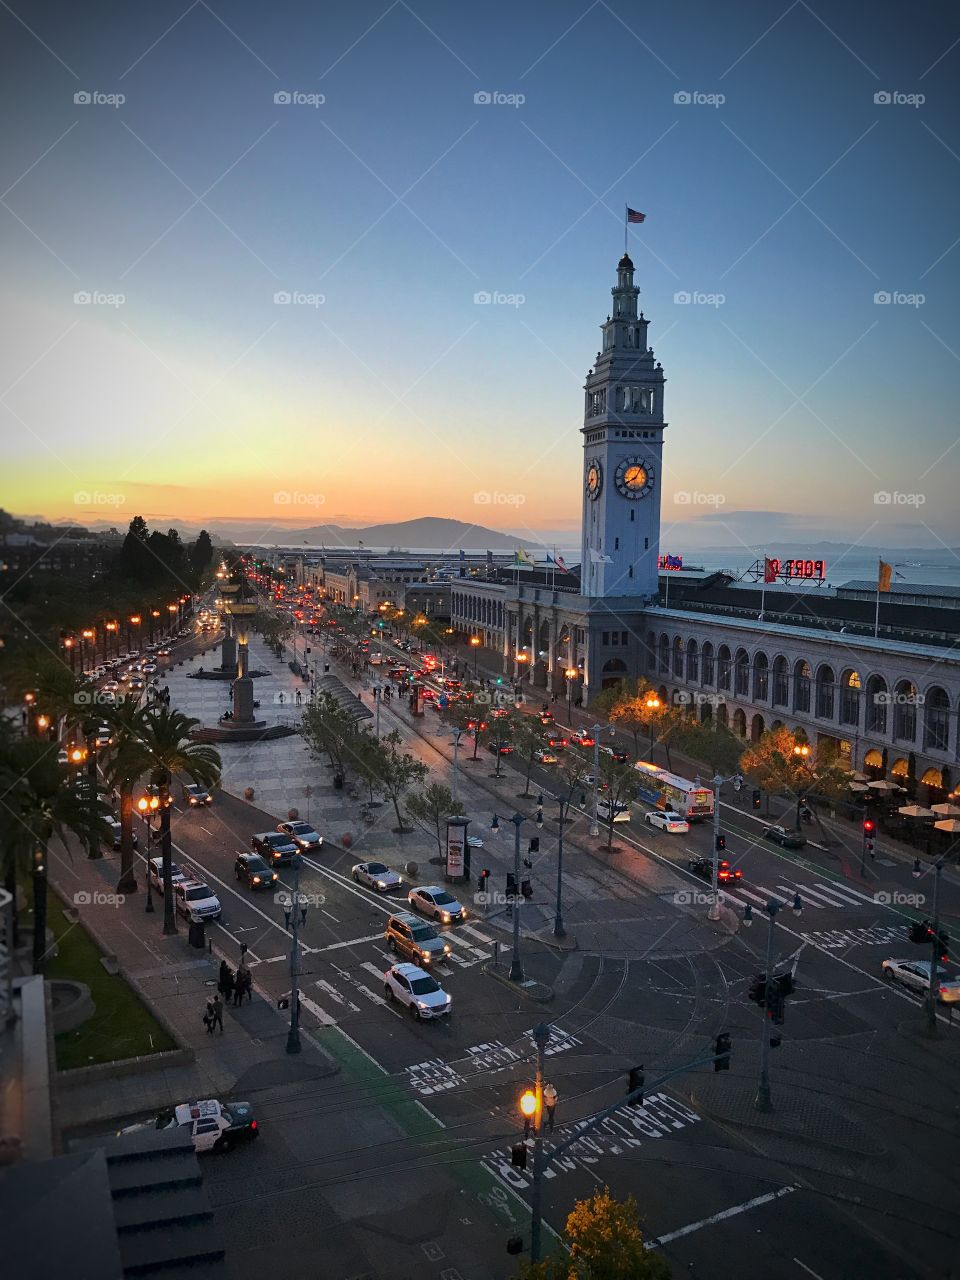 San Francisco Ferry Building at sunset